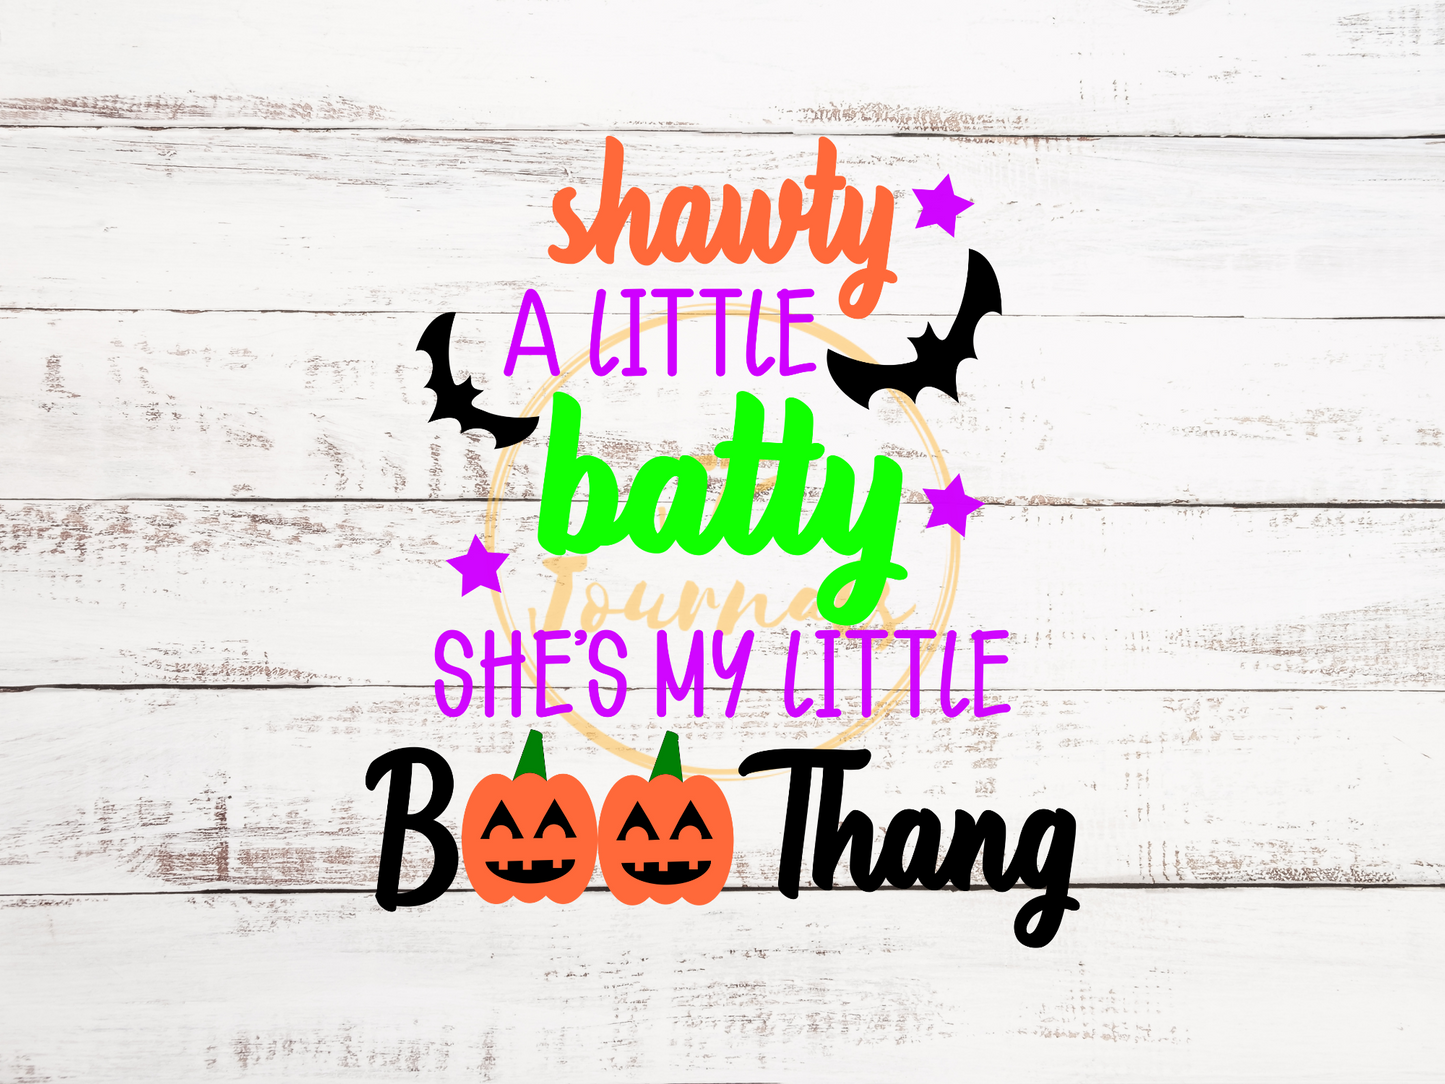 Halloween SVG File, Shawty A Little Batty She's My Little Boo Thang, Baby Toddler Halloween SVG File, Halloween SVG for Baby Toddler